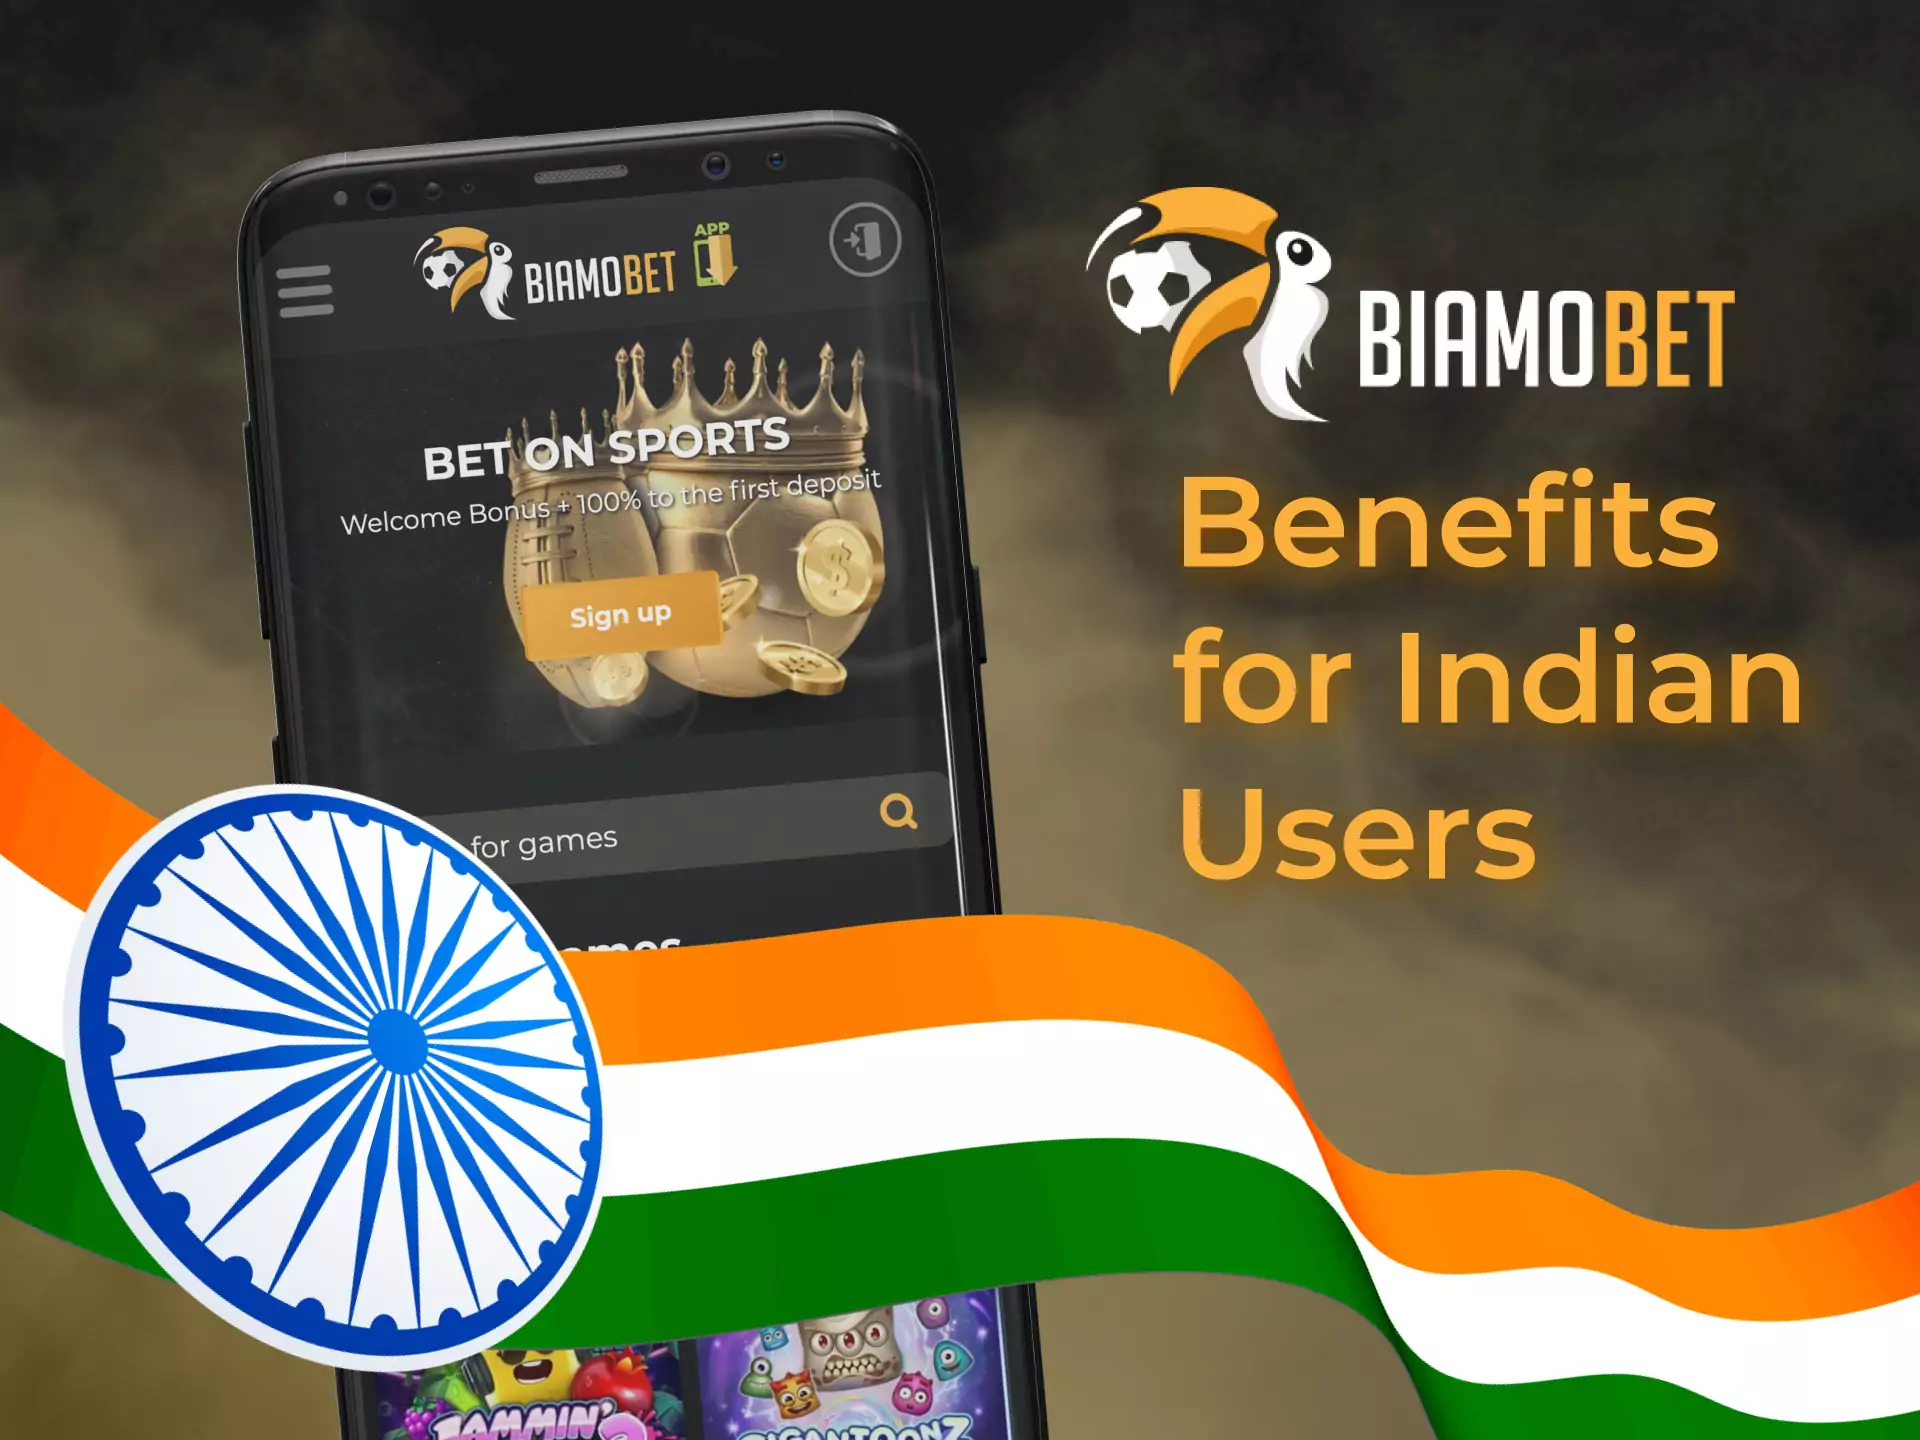 For Indian uses, there is a wide range of sports betting options, INR currency in payment methods and beneficial bonuses from Biamobet.